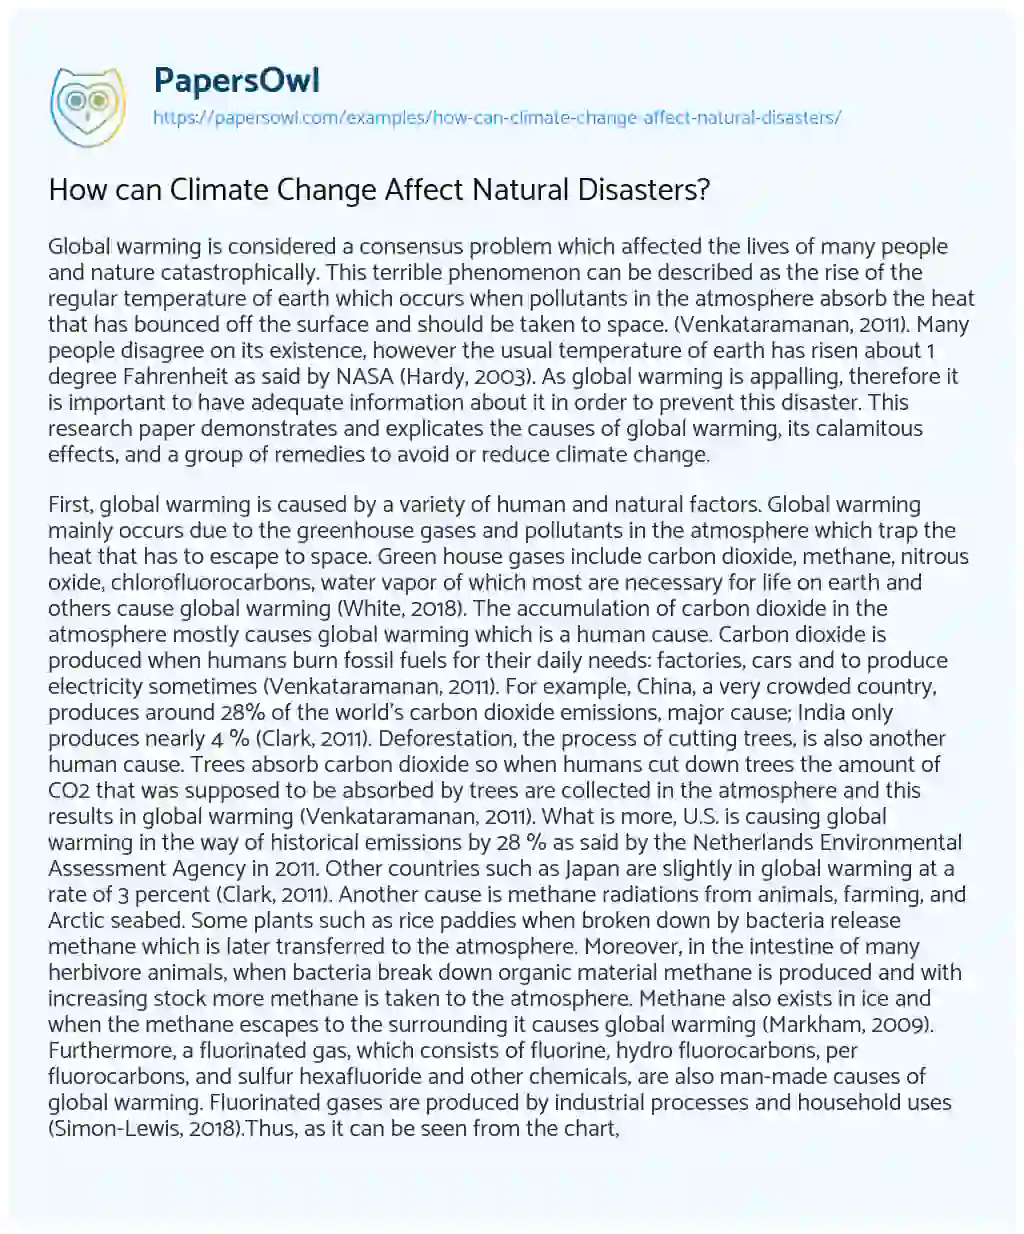 Essay on How Can Climate Change Affect Natural Disasters?